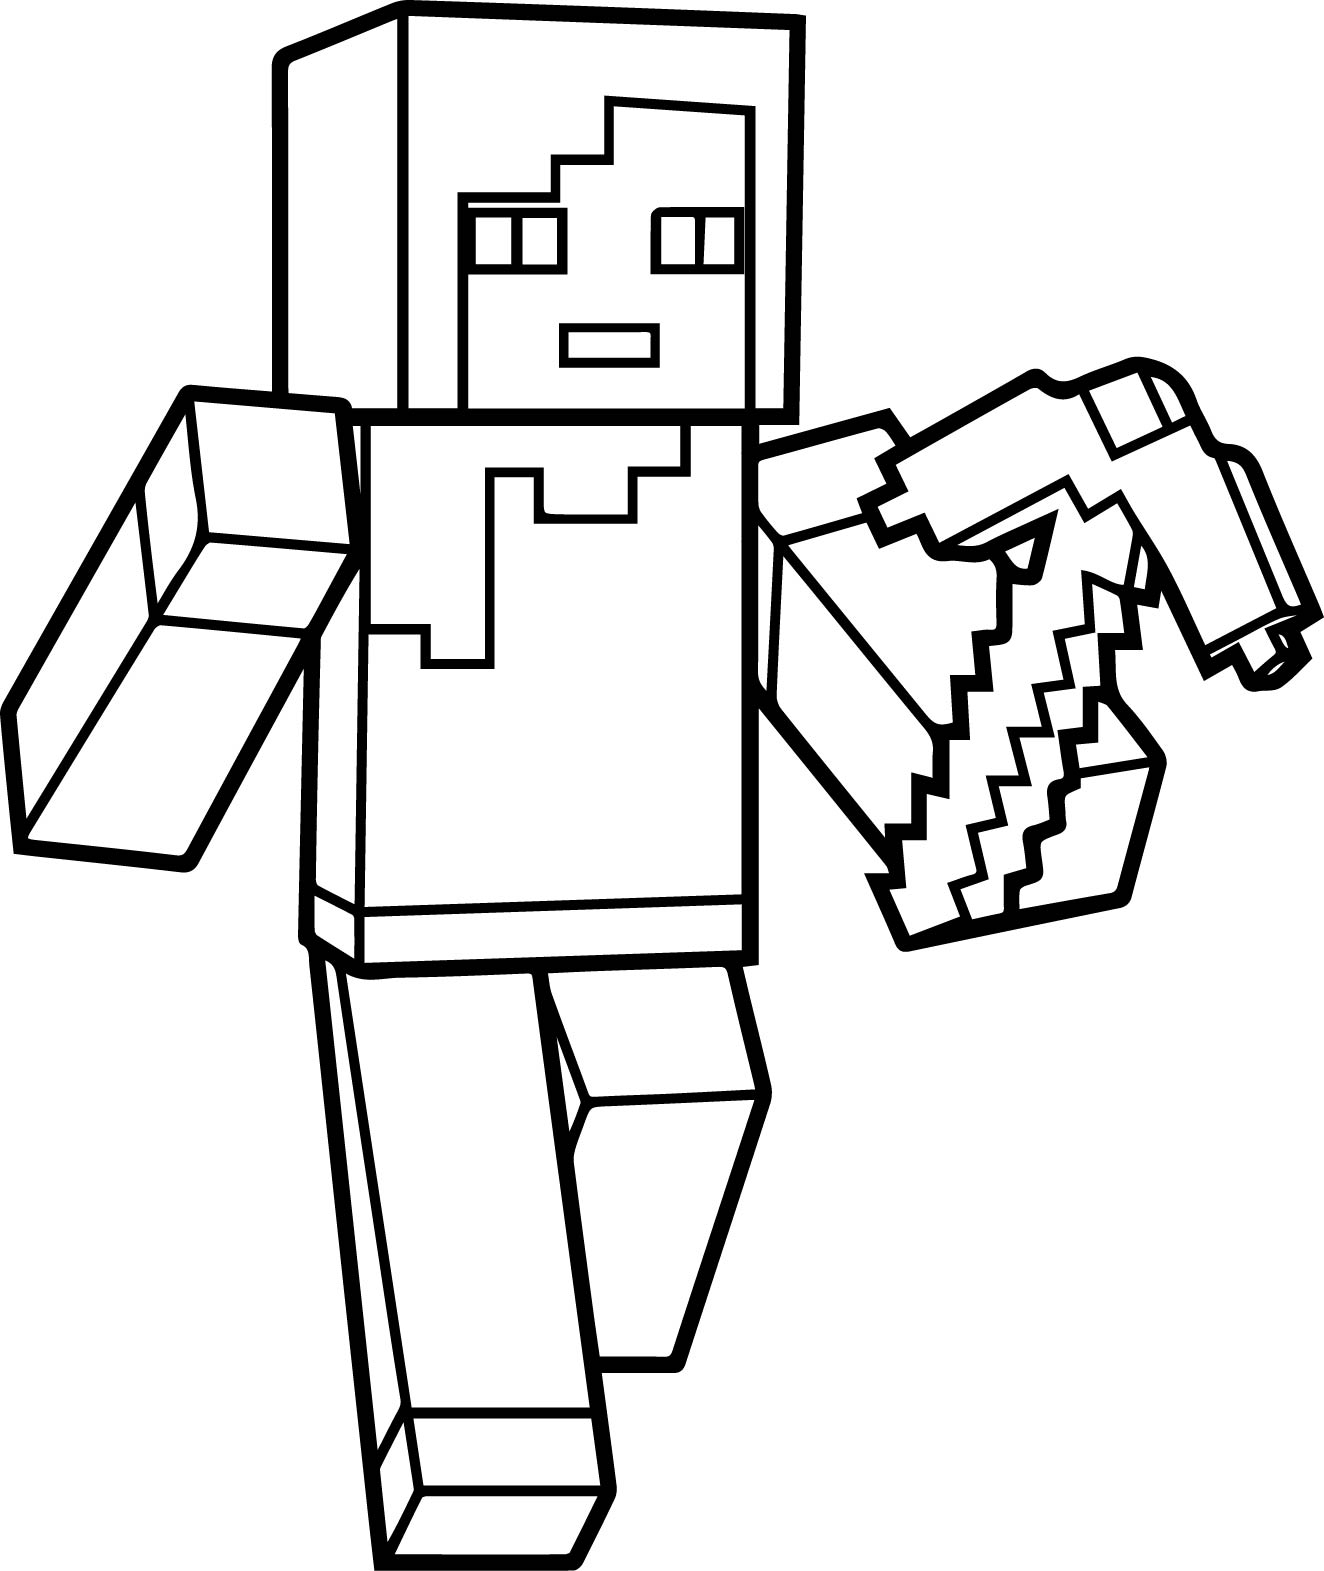 Download Minecraft Coloring Pages - Best Coloring Pages For Kids